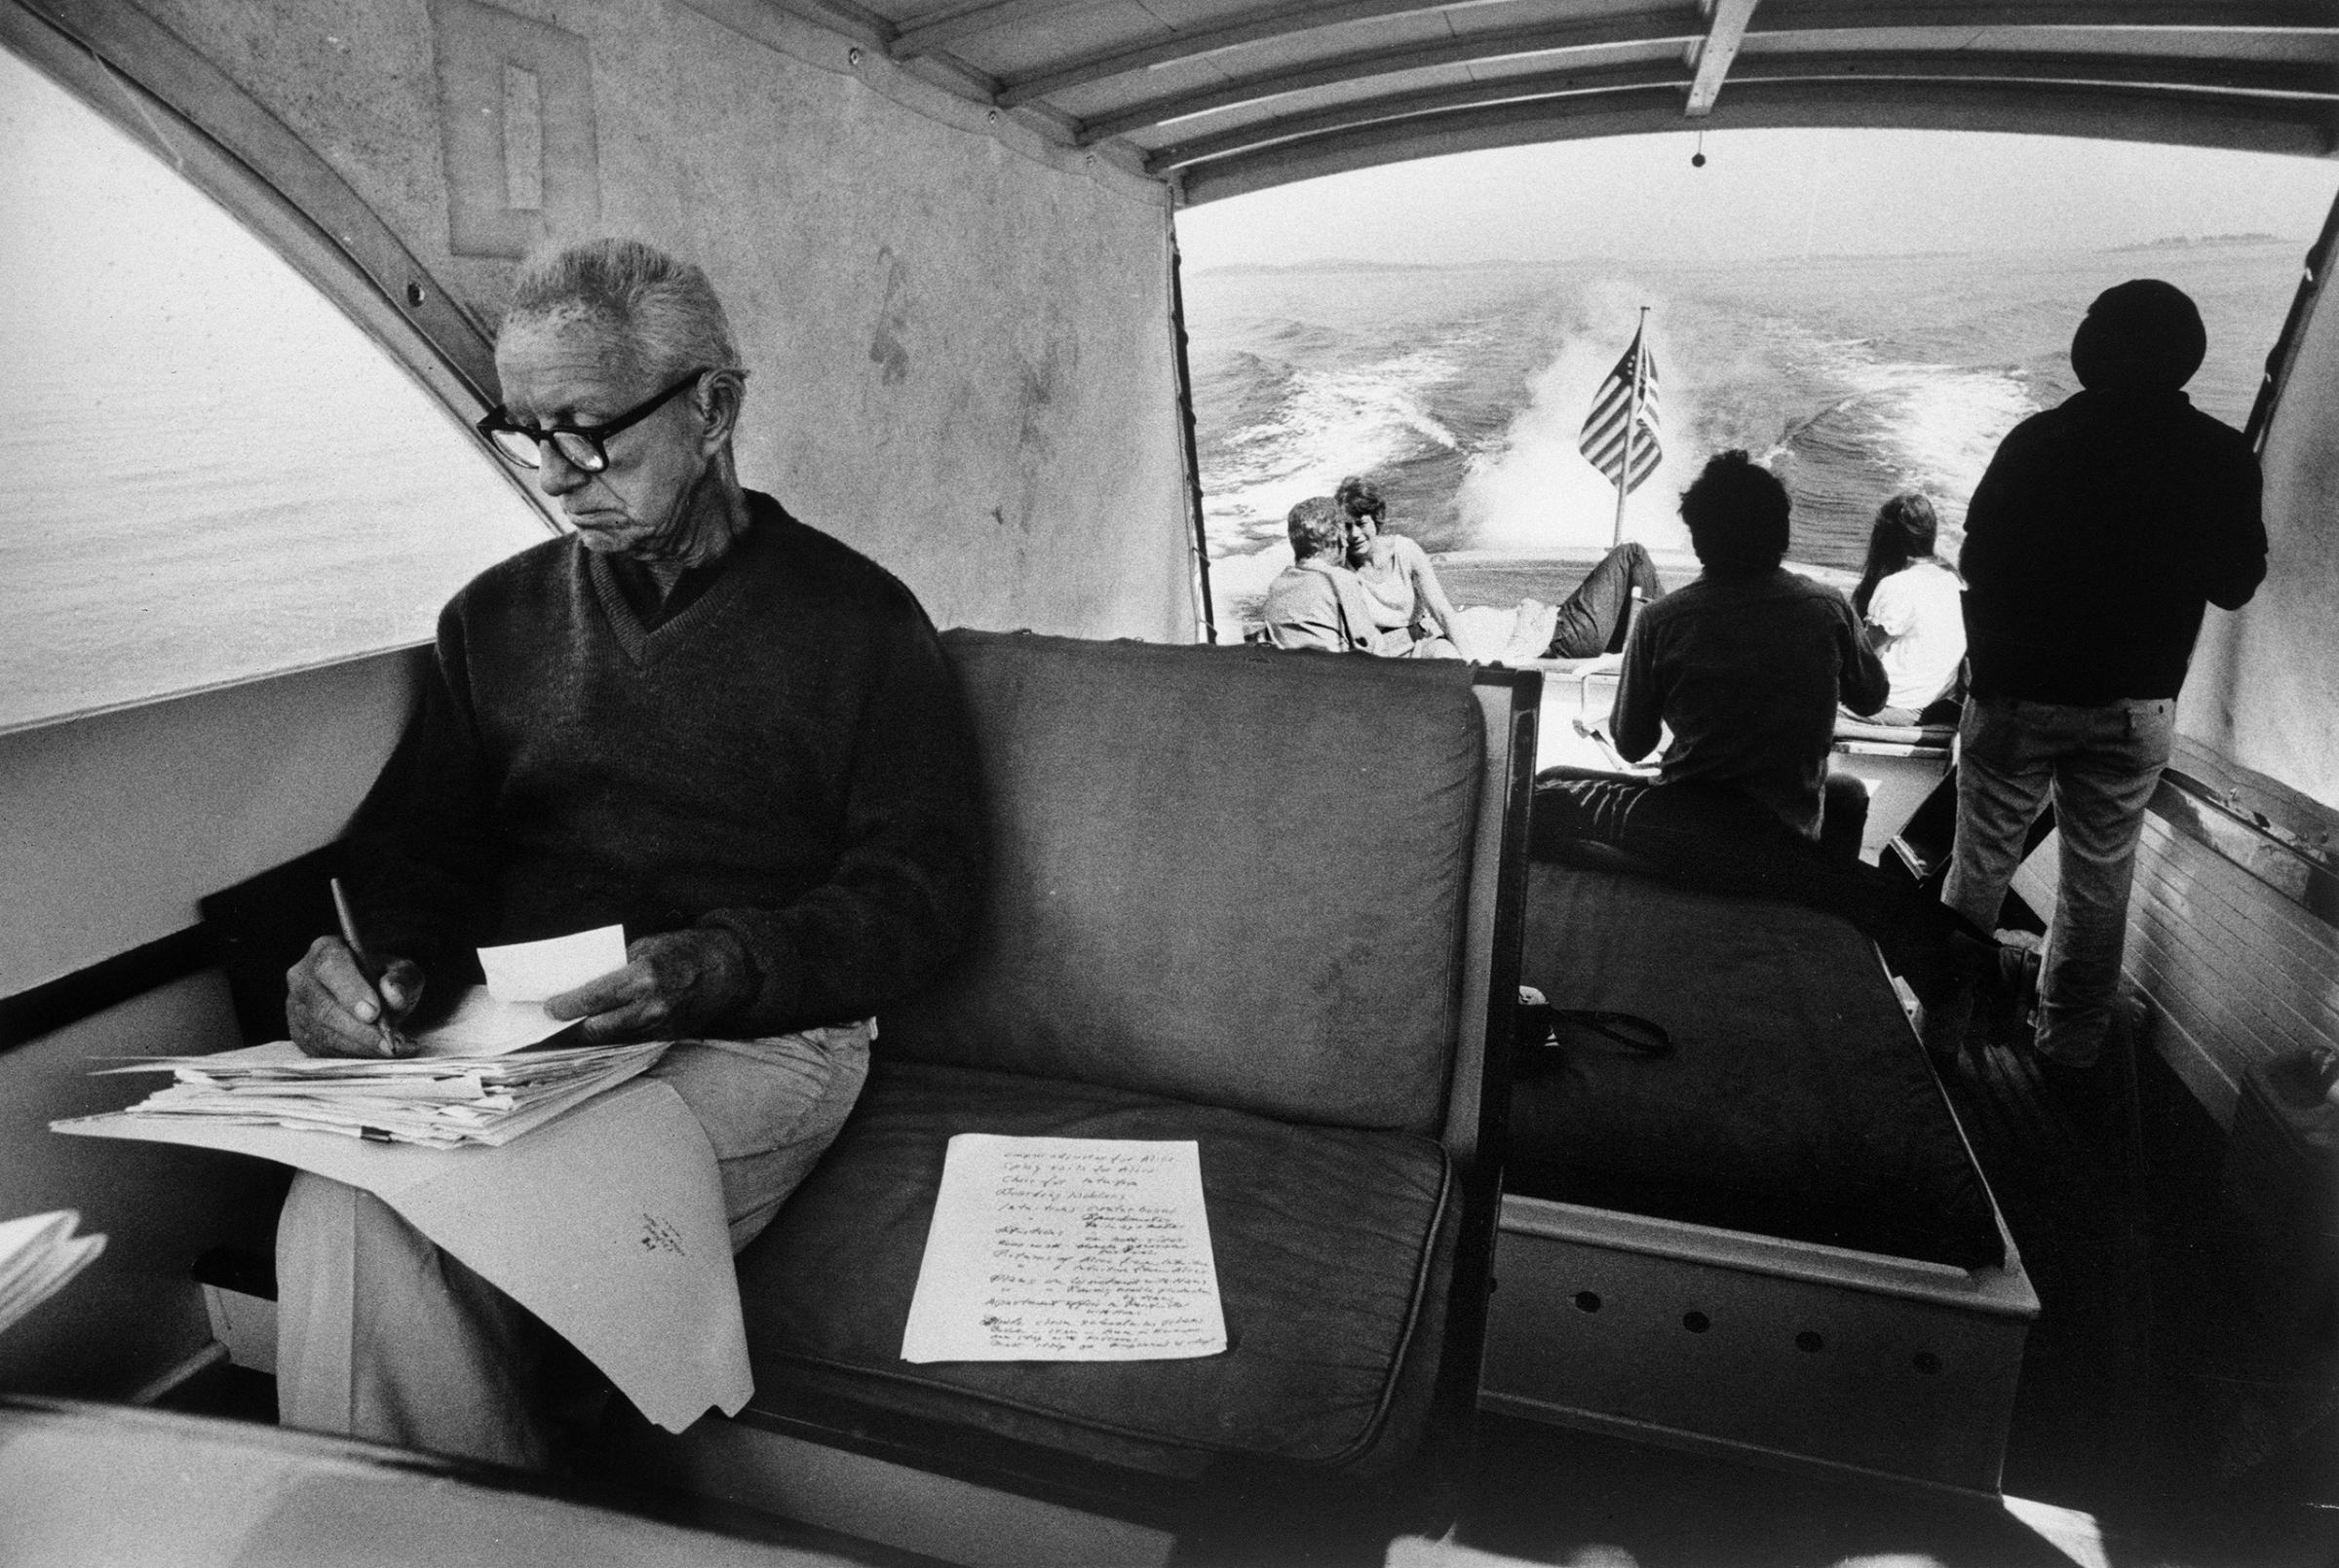 Buckminster Fuller, champion of geodesic domes, ferries houseguests to Bear Island, which his grandmother bought in 1904. It remains his family’s summer seat. Penobscot Bay, Maine, 1970.